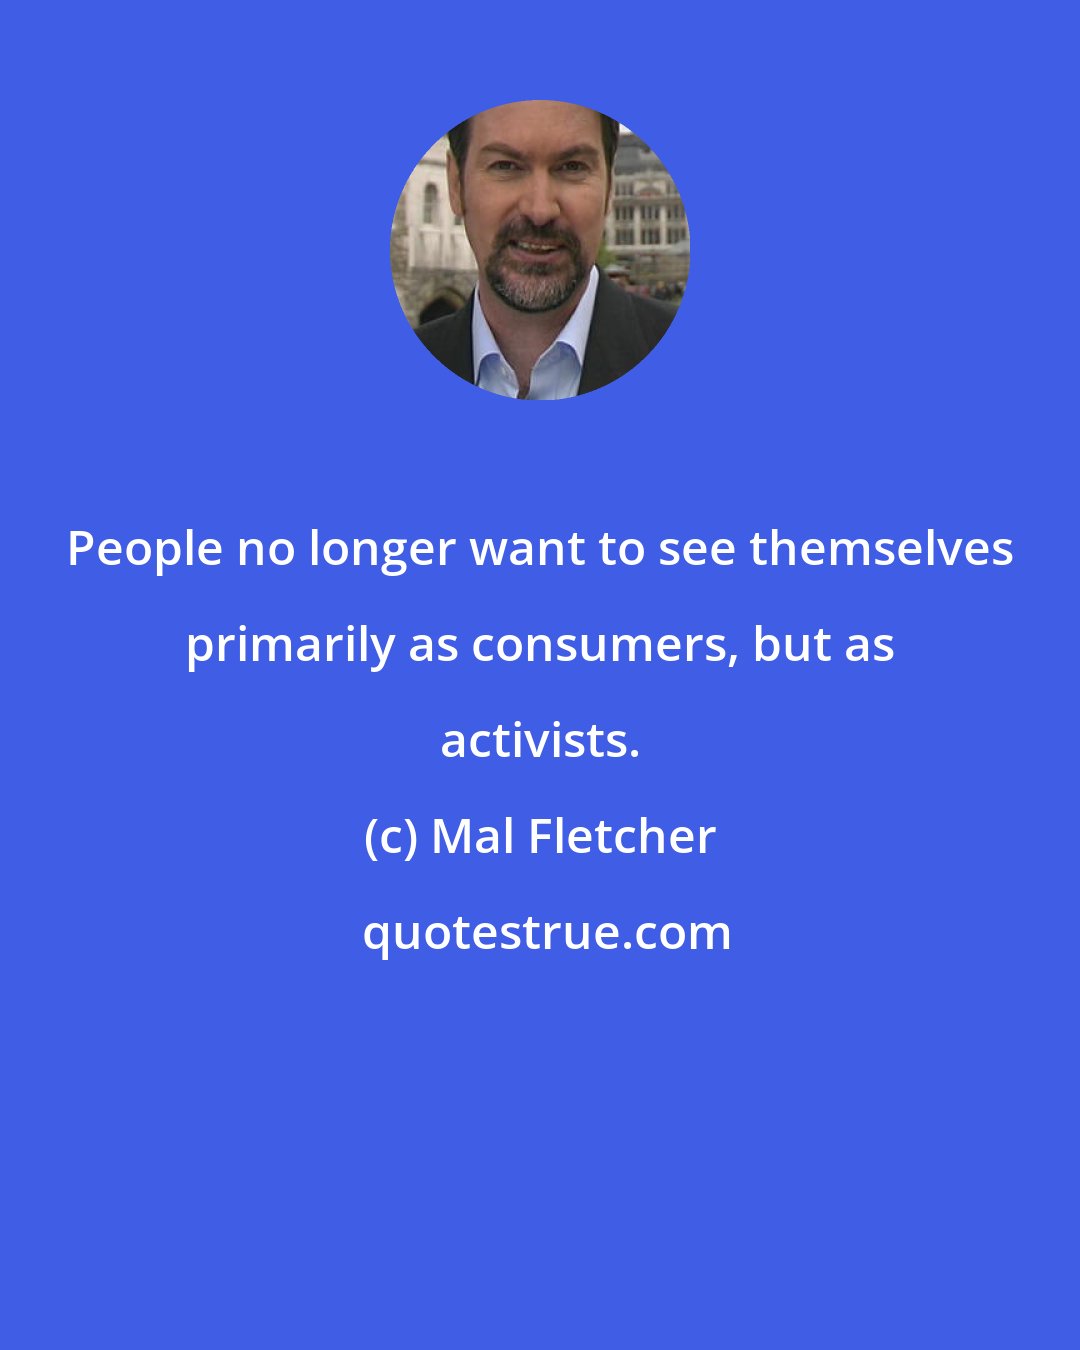 Mal Fletcher: People no longer want to see themselves primarily as consumers, but as activists.